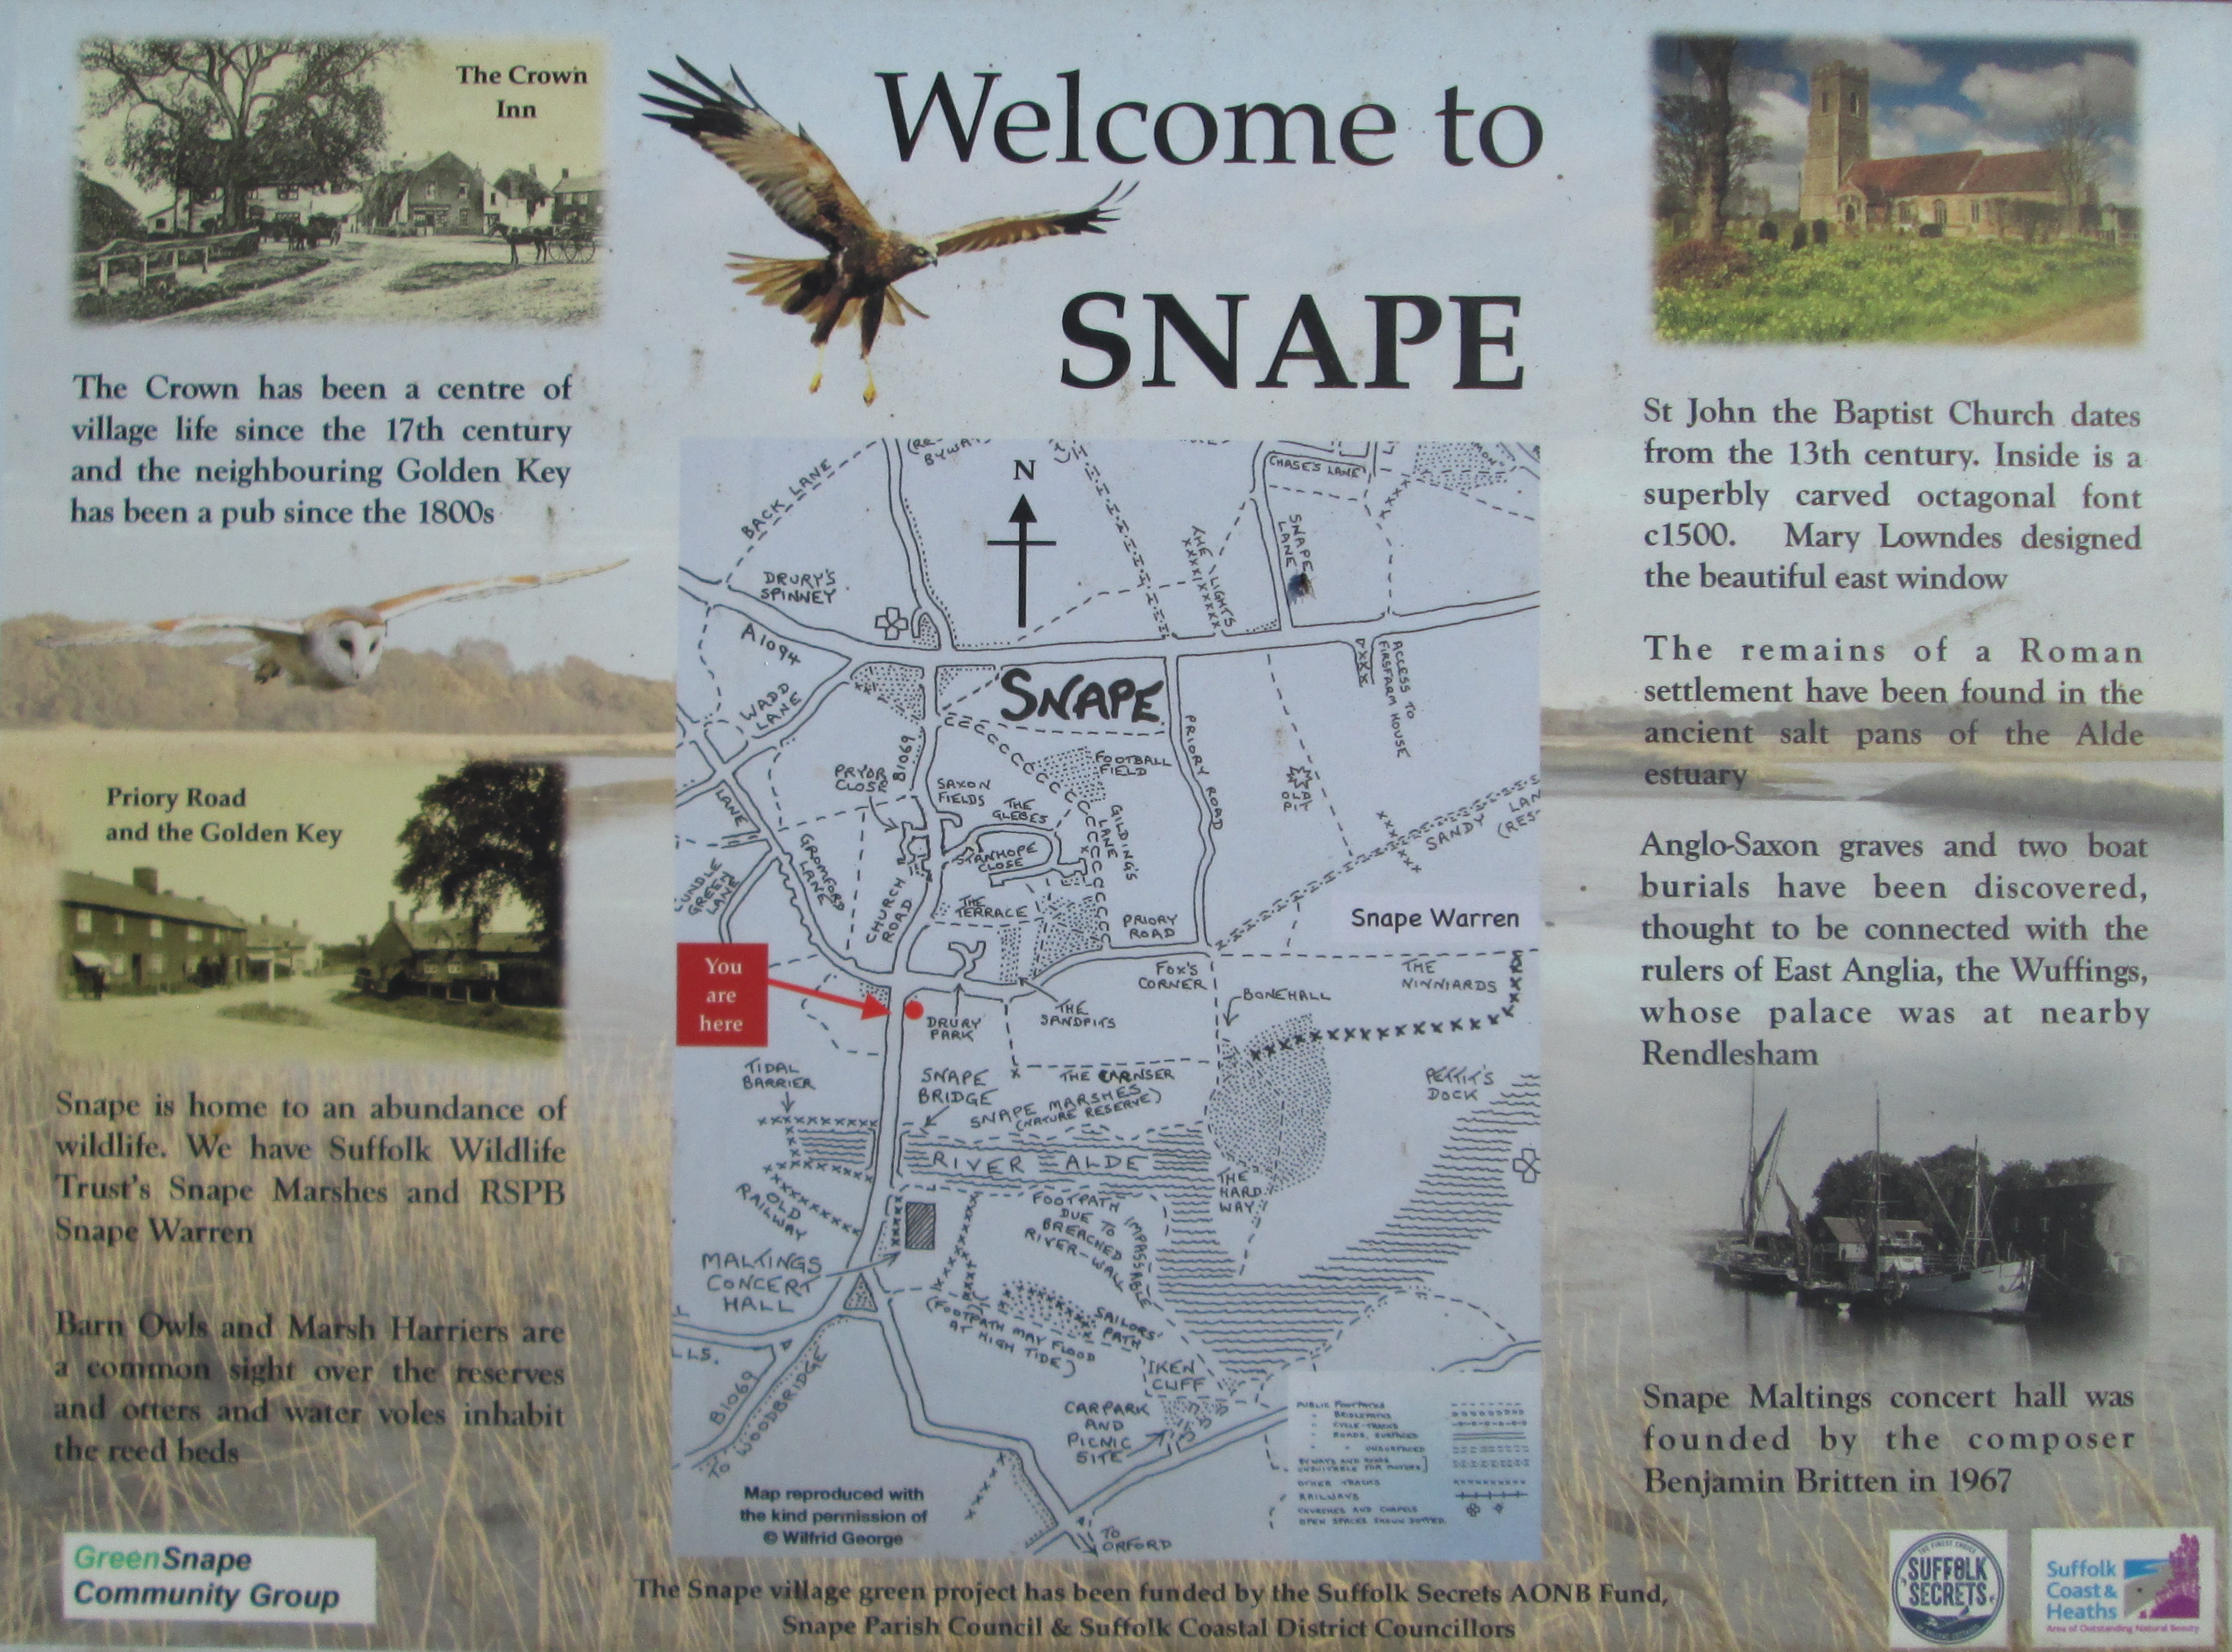 information panel on Snape Village Green, outside the Crown